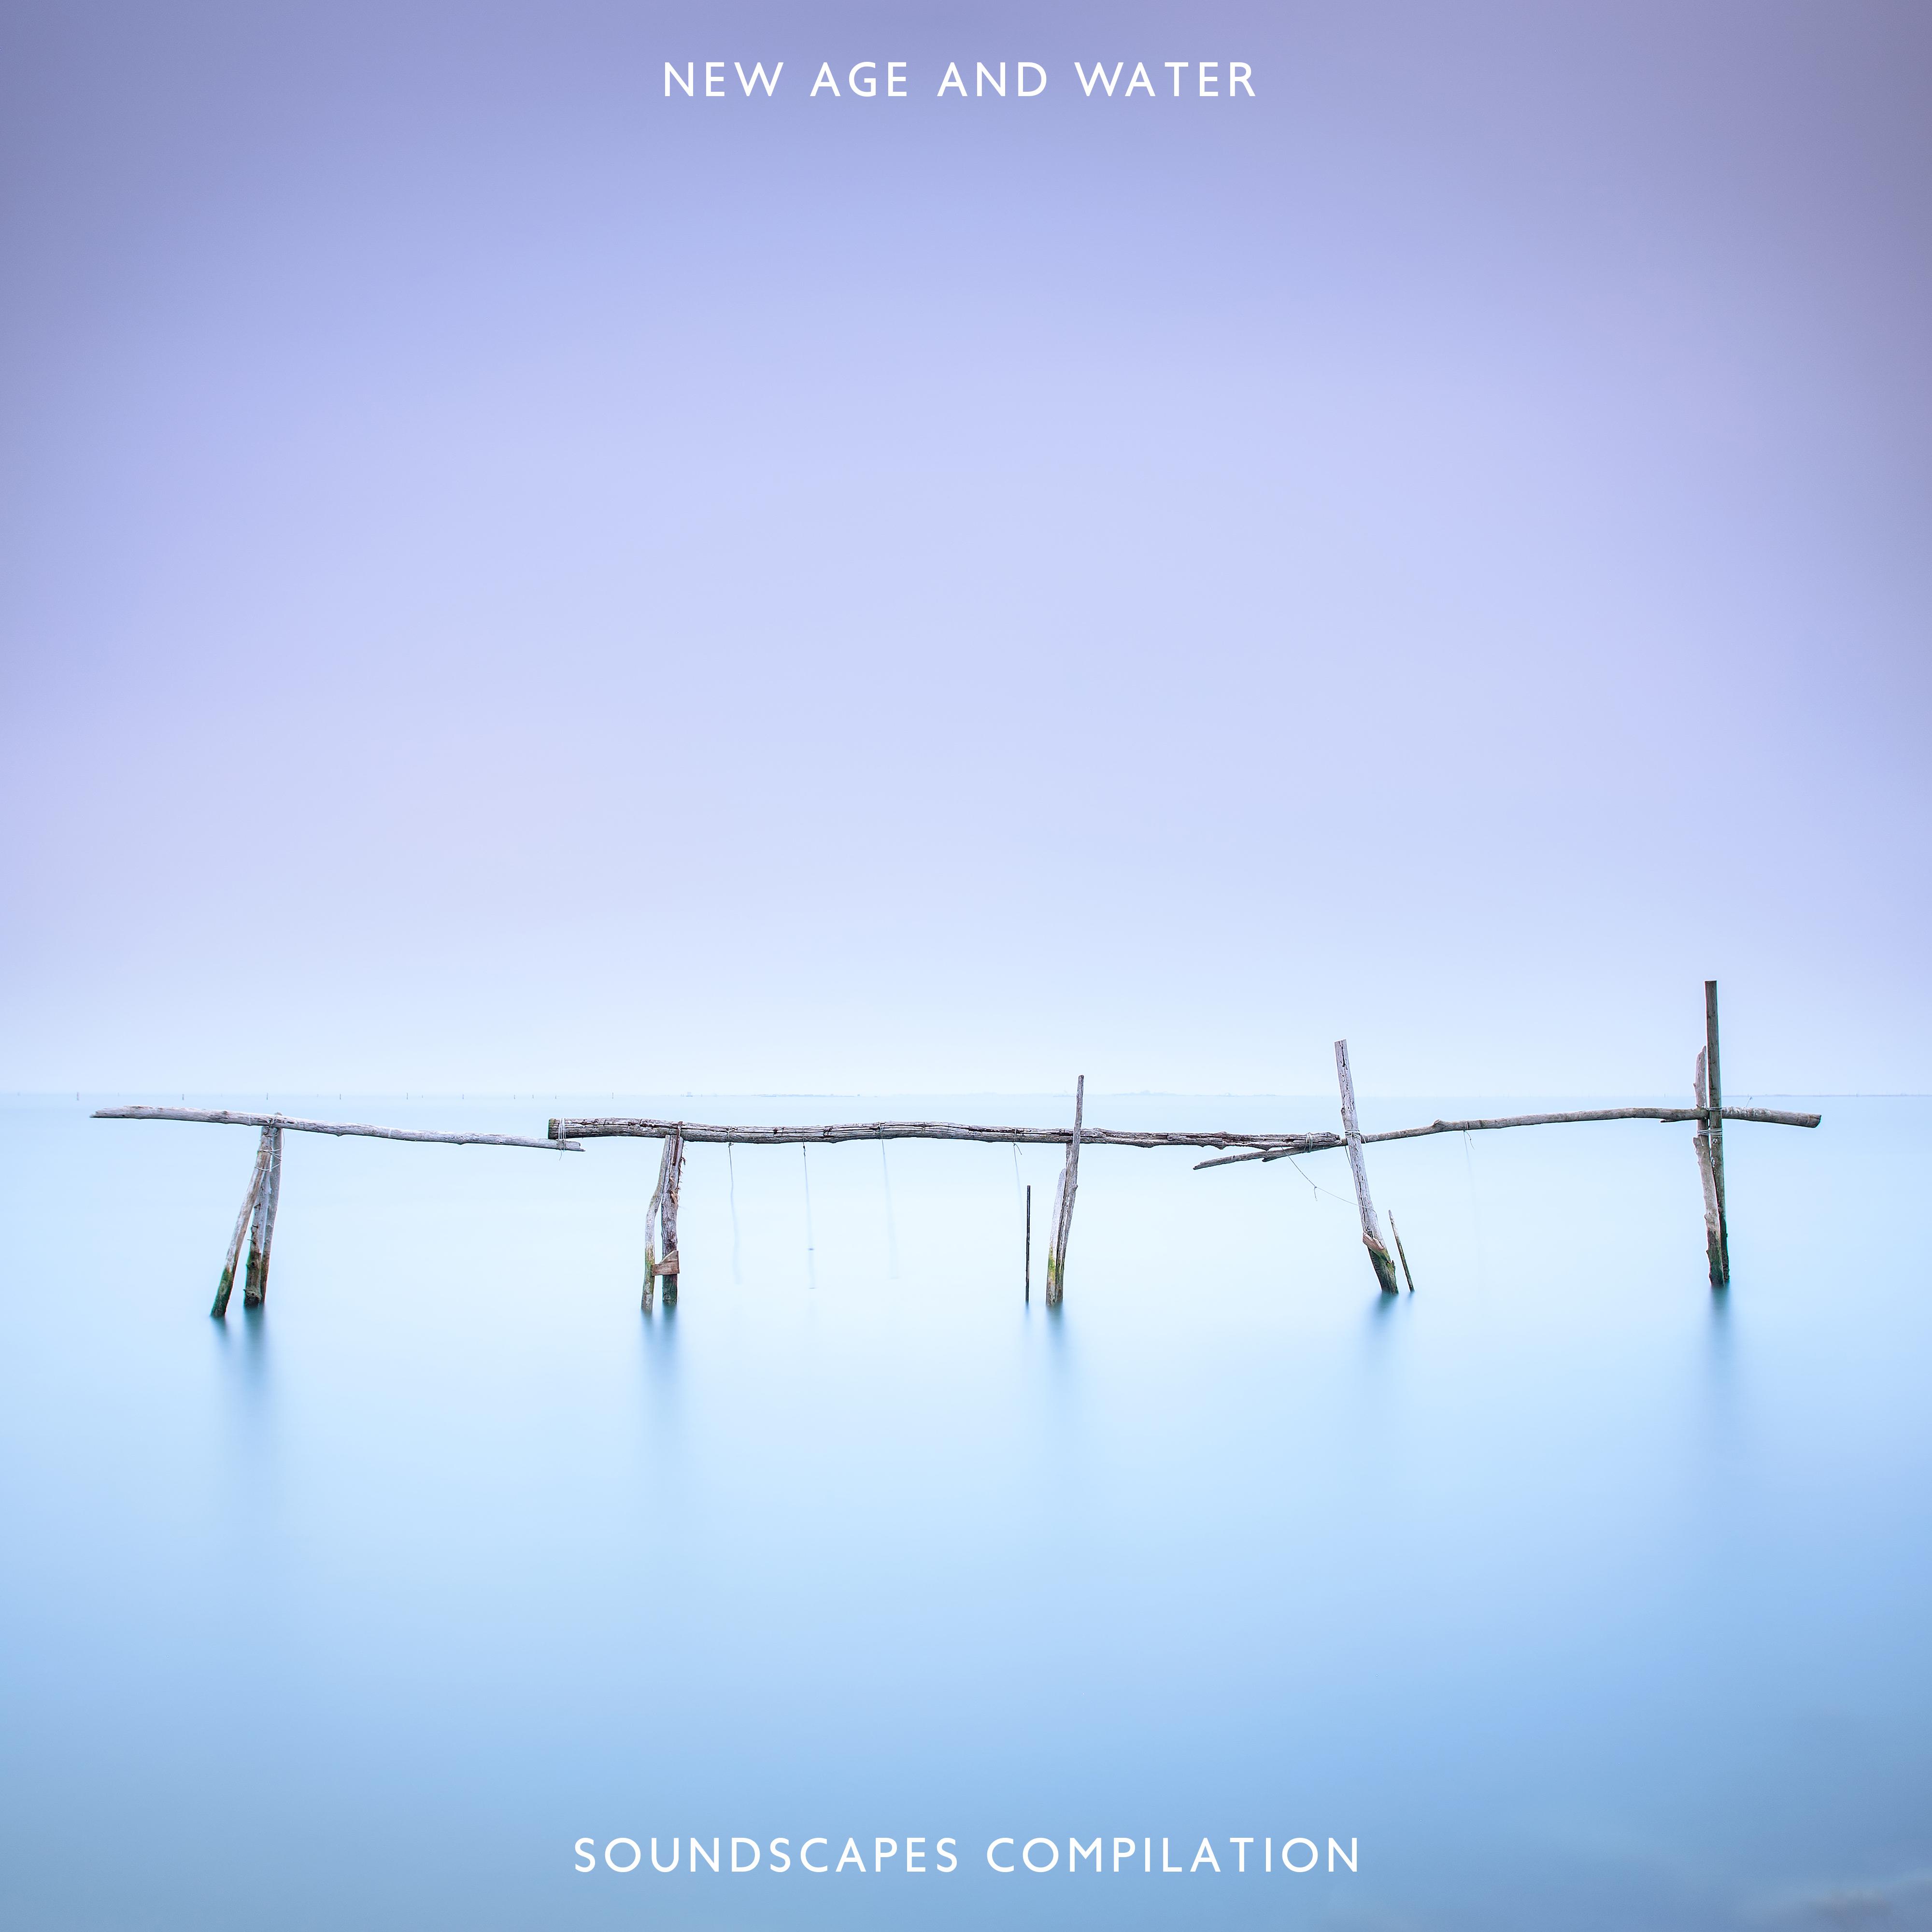 New Age and Water Soundscapes Compilation: 15 Universal Compositions for Sleep, Spa, Relaxation, Massage, Bathing or Rest